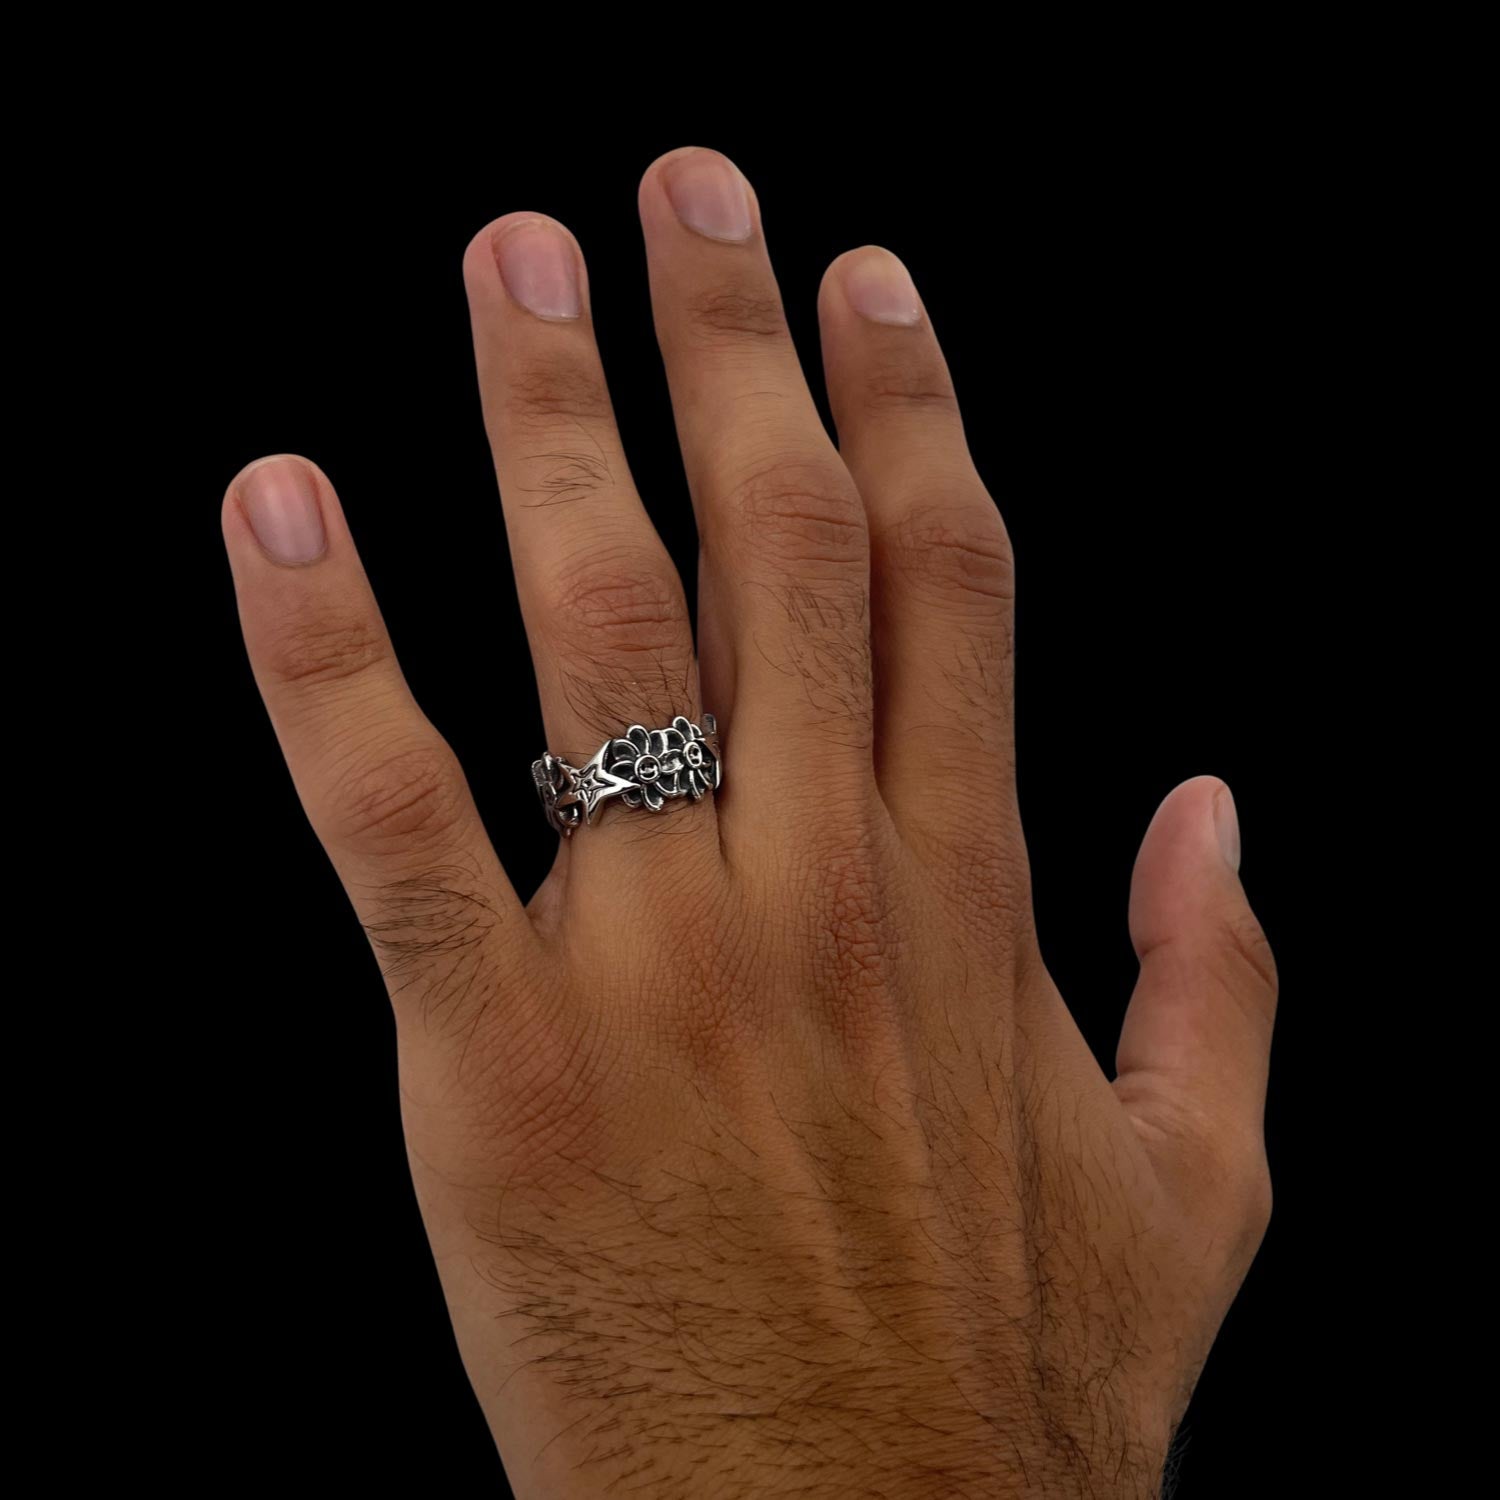 Daisy Chain Ring on male hand